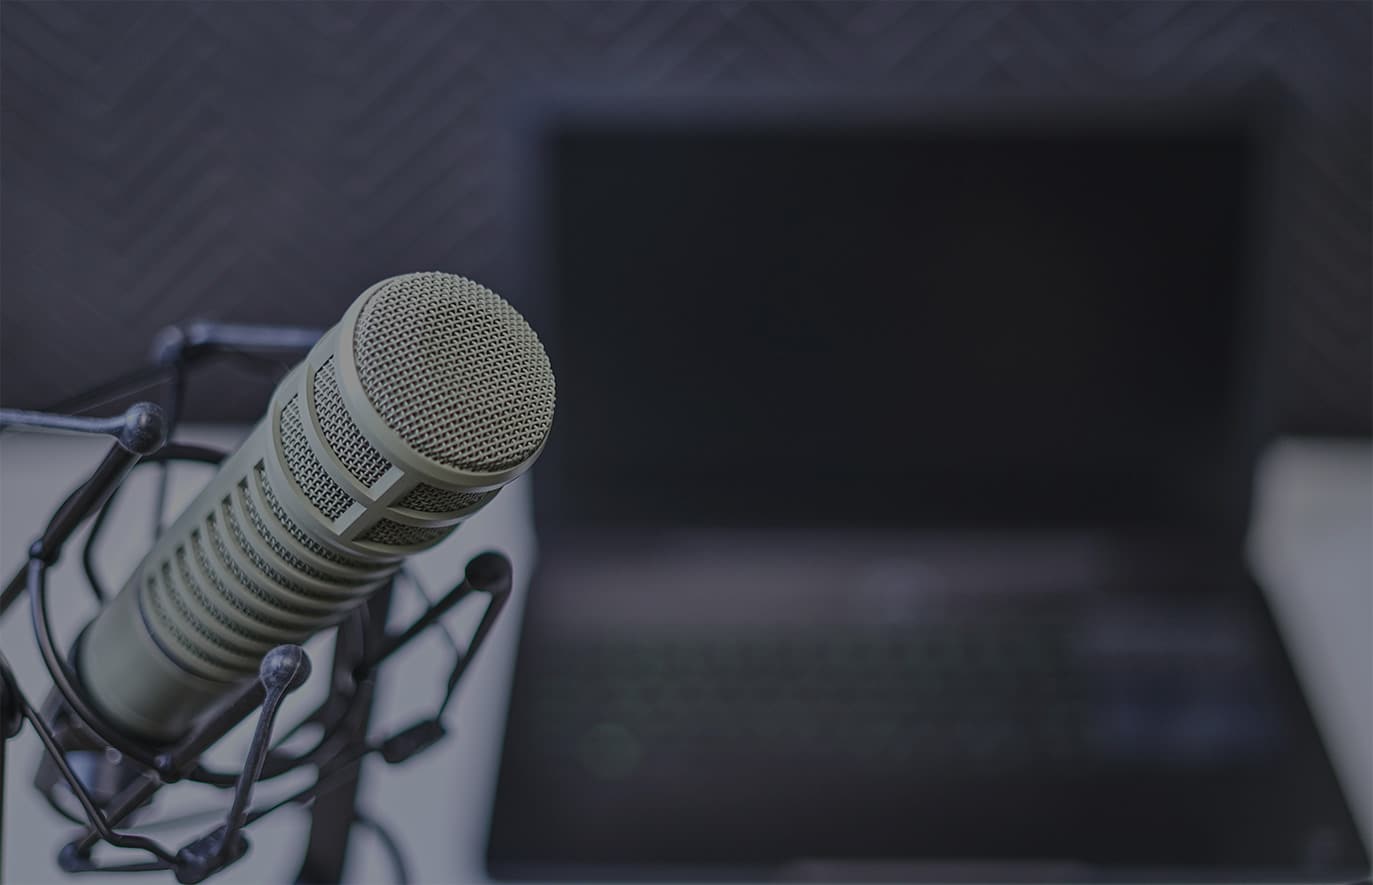 FCPA Compliance & Ethics Podcast featuring Jay Rosen — Everything You Wanted to Know About Monitors But Were Afraid To Ask: Ep. 3